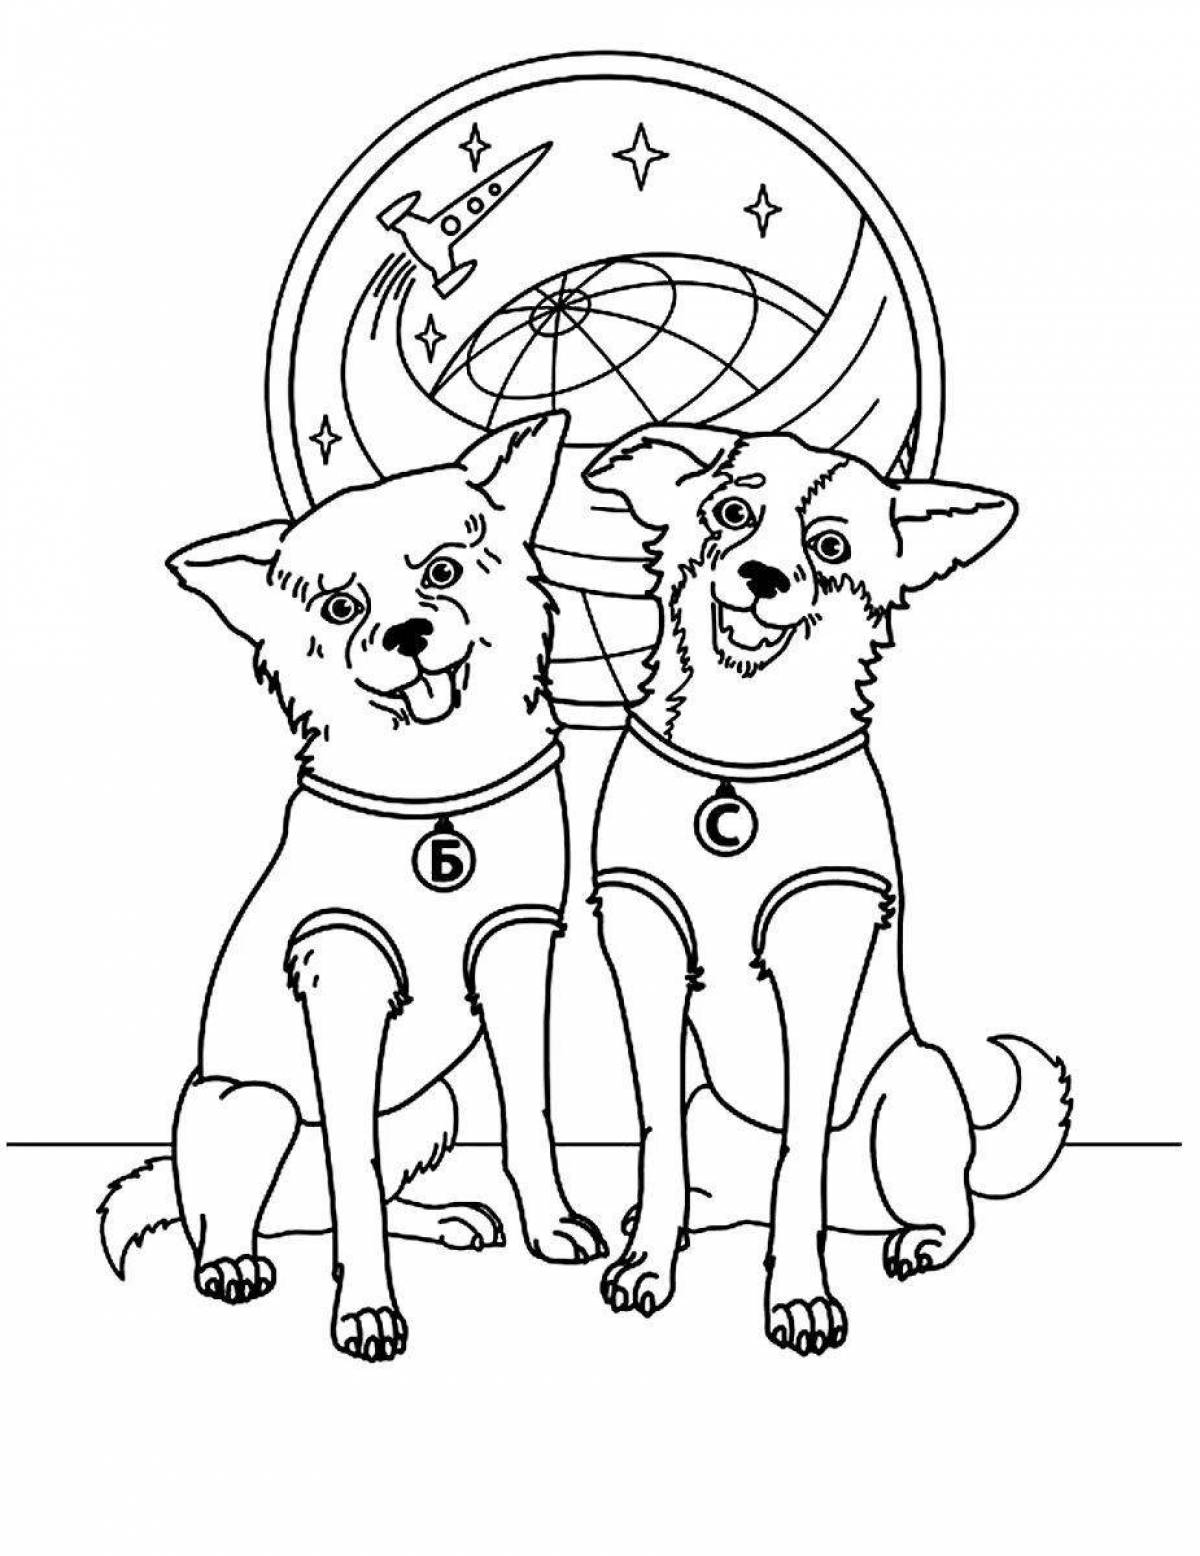 Fabulous coloring pages animals in orbit